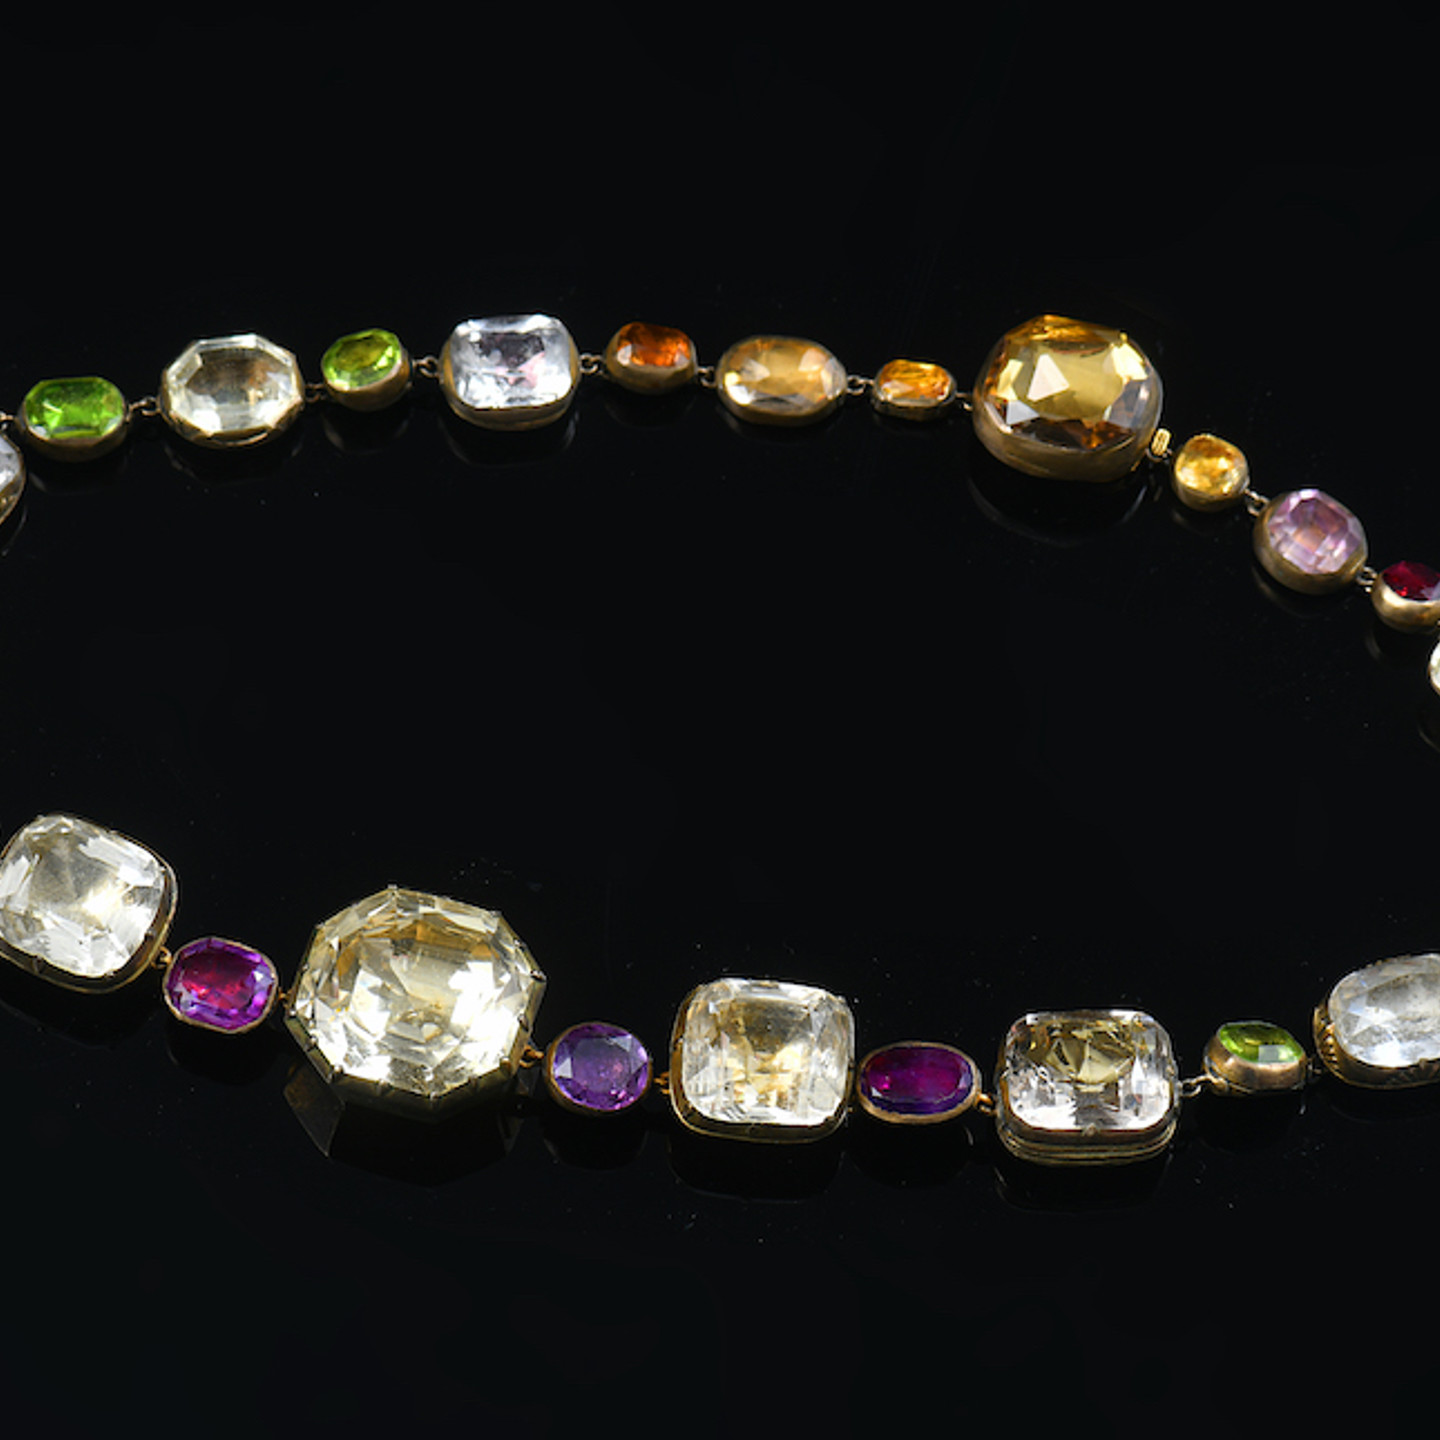 Georgian Victorian Necklace Set With Amethysts, Peridot, Quartz And Garnets. Sold For £4,800